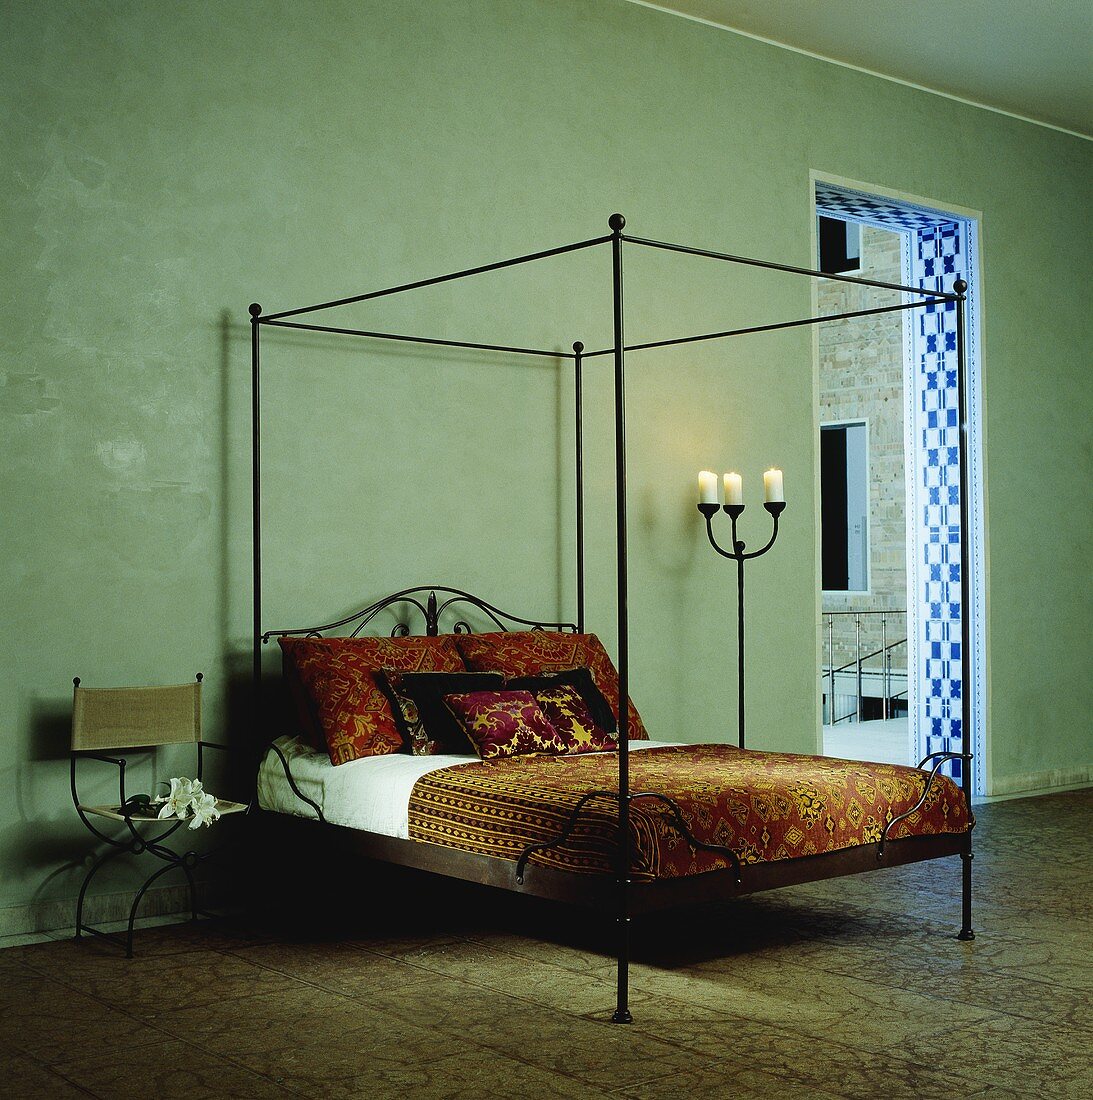 A green room with a black, steel-framed four-poster bed and oriental bed clothes